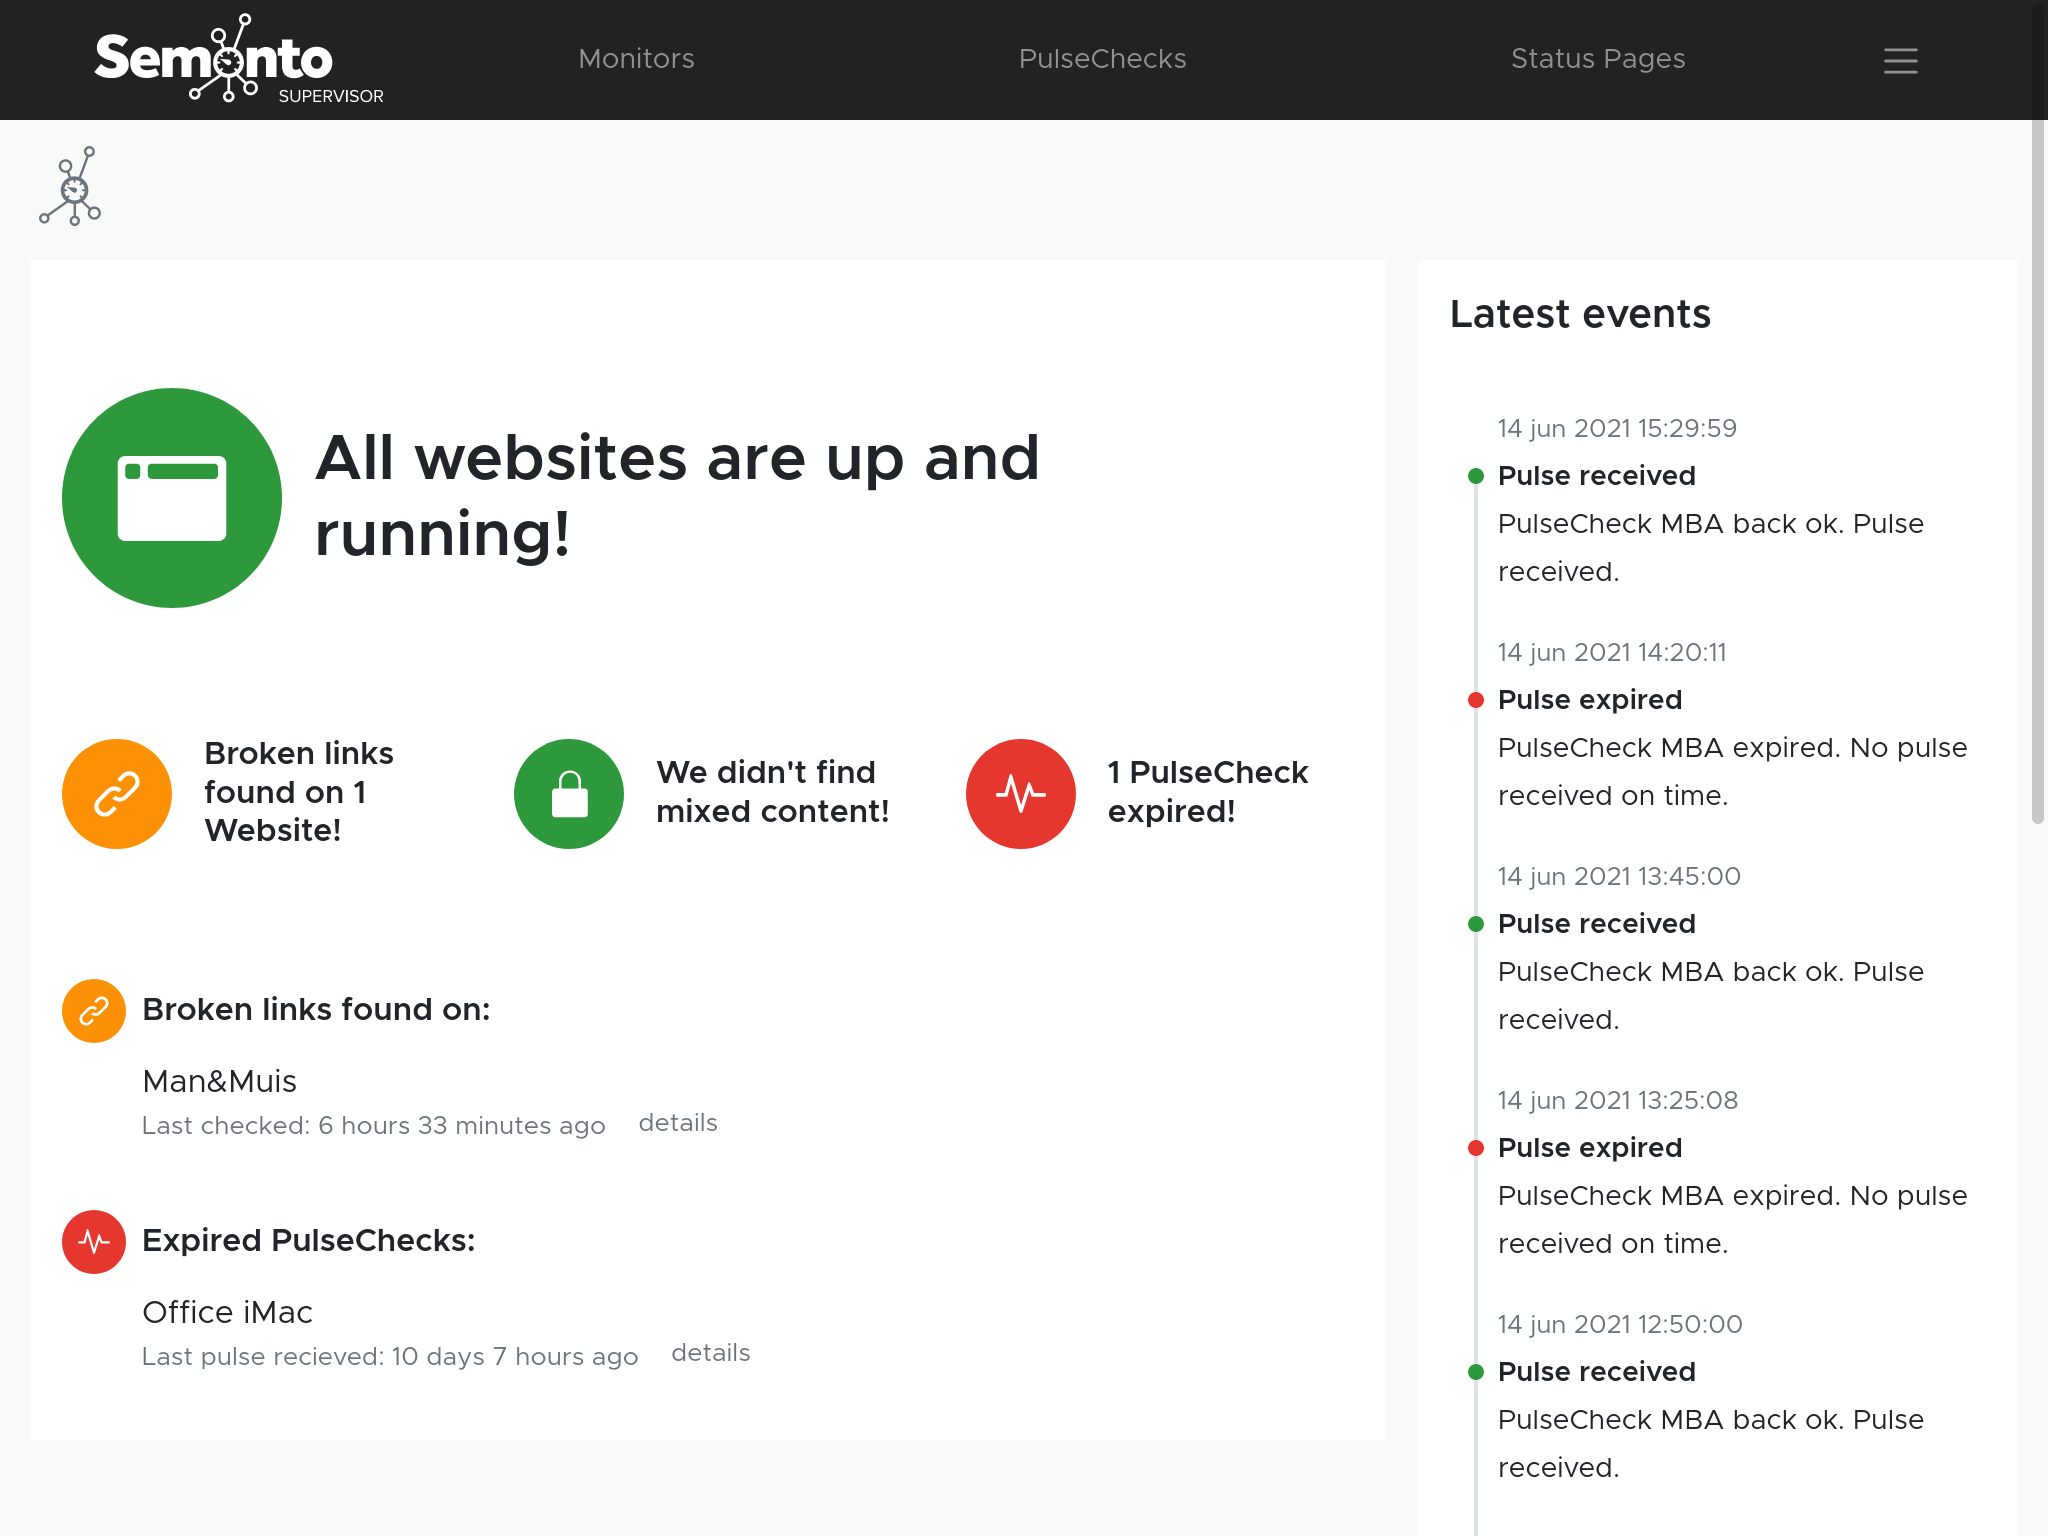 The new landing page in Semonto